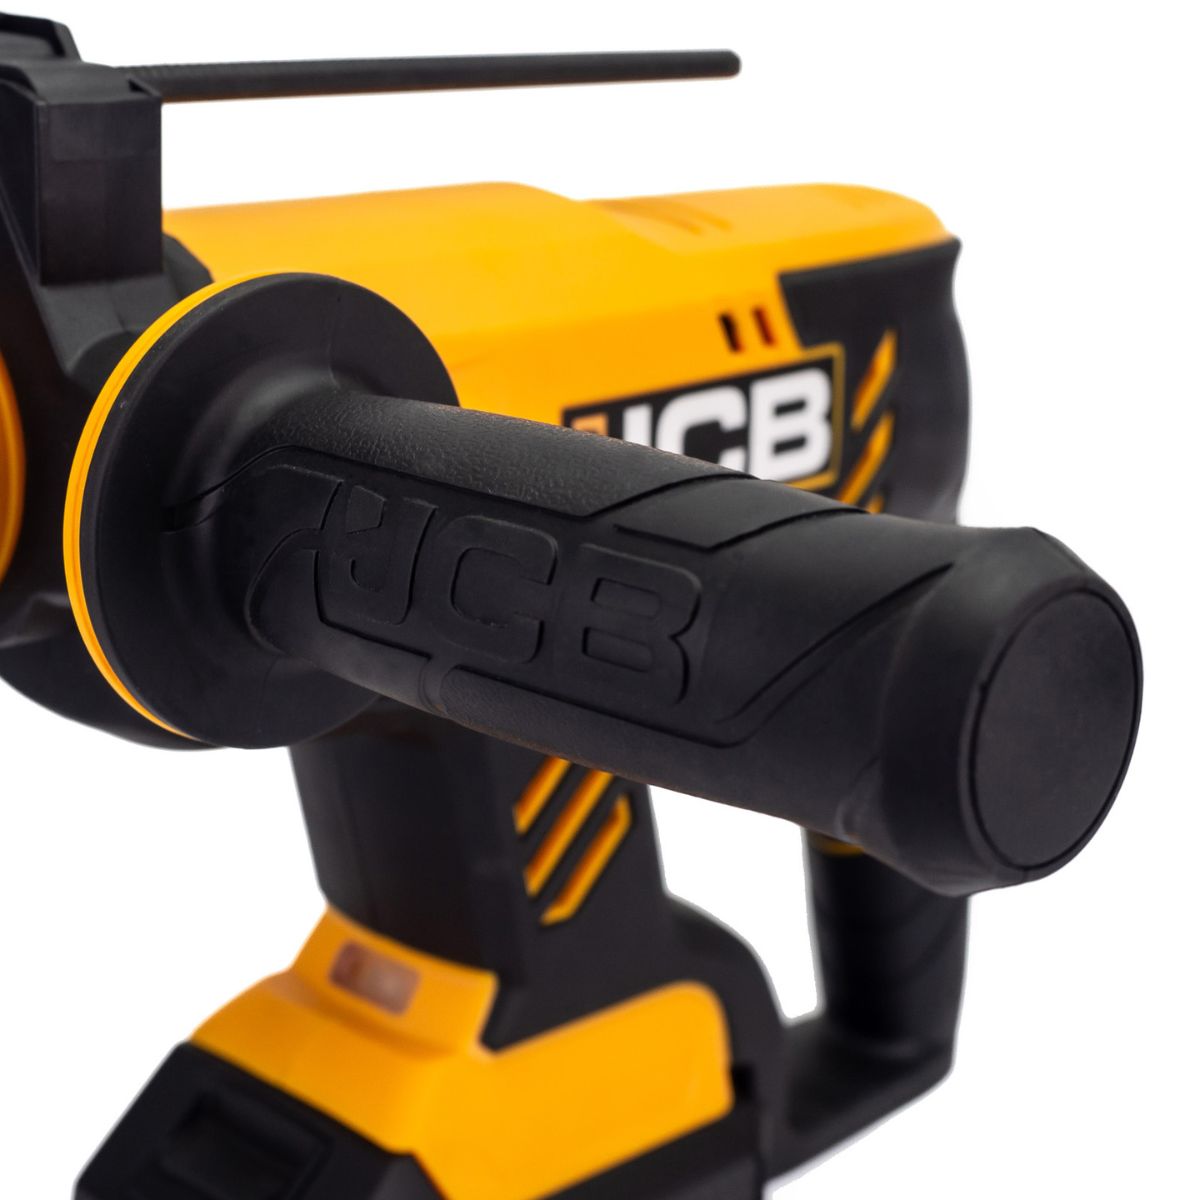 JCB 21-18BL3PK-2 18V Brushless 3 Piece Tool Kit with 2x2.0Ah Battery & Charger